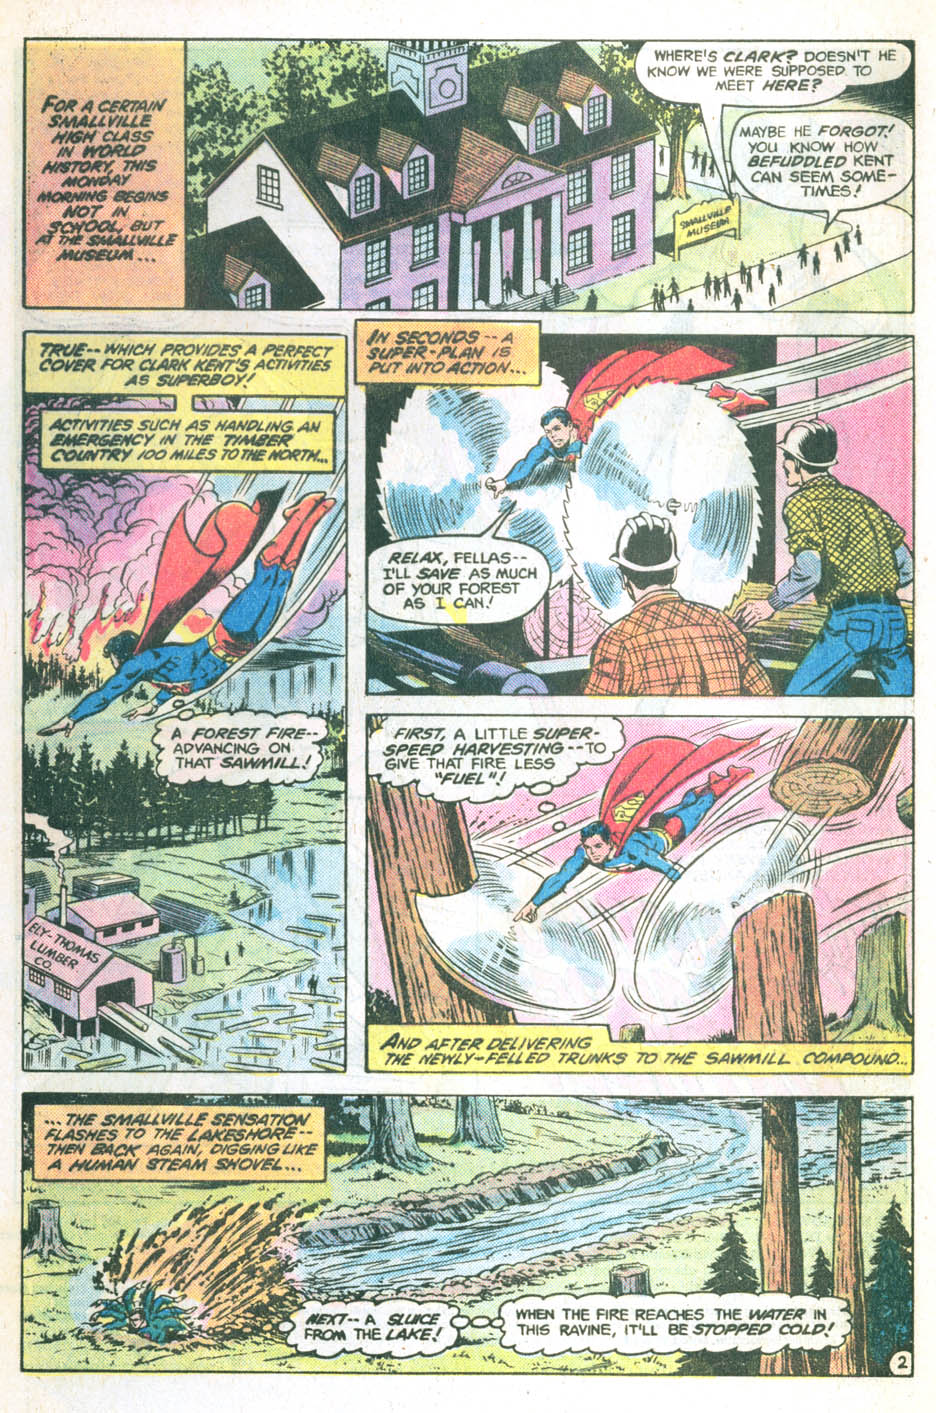 The New Adventures of Superboy 25 Page 2